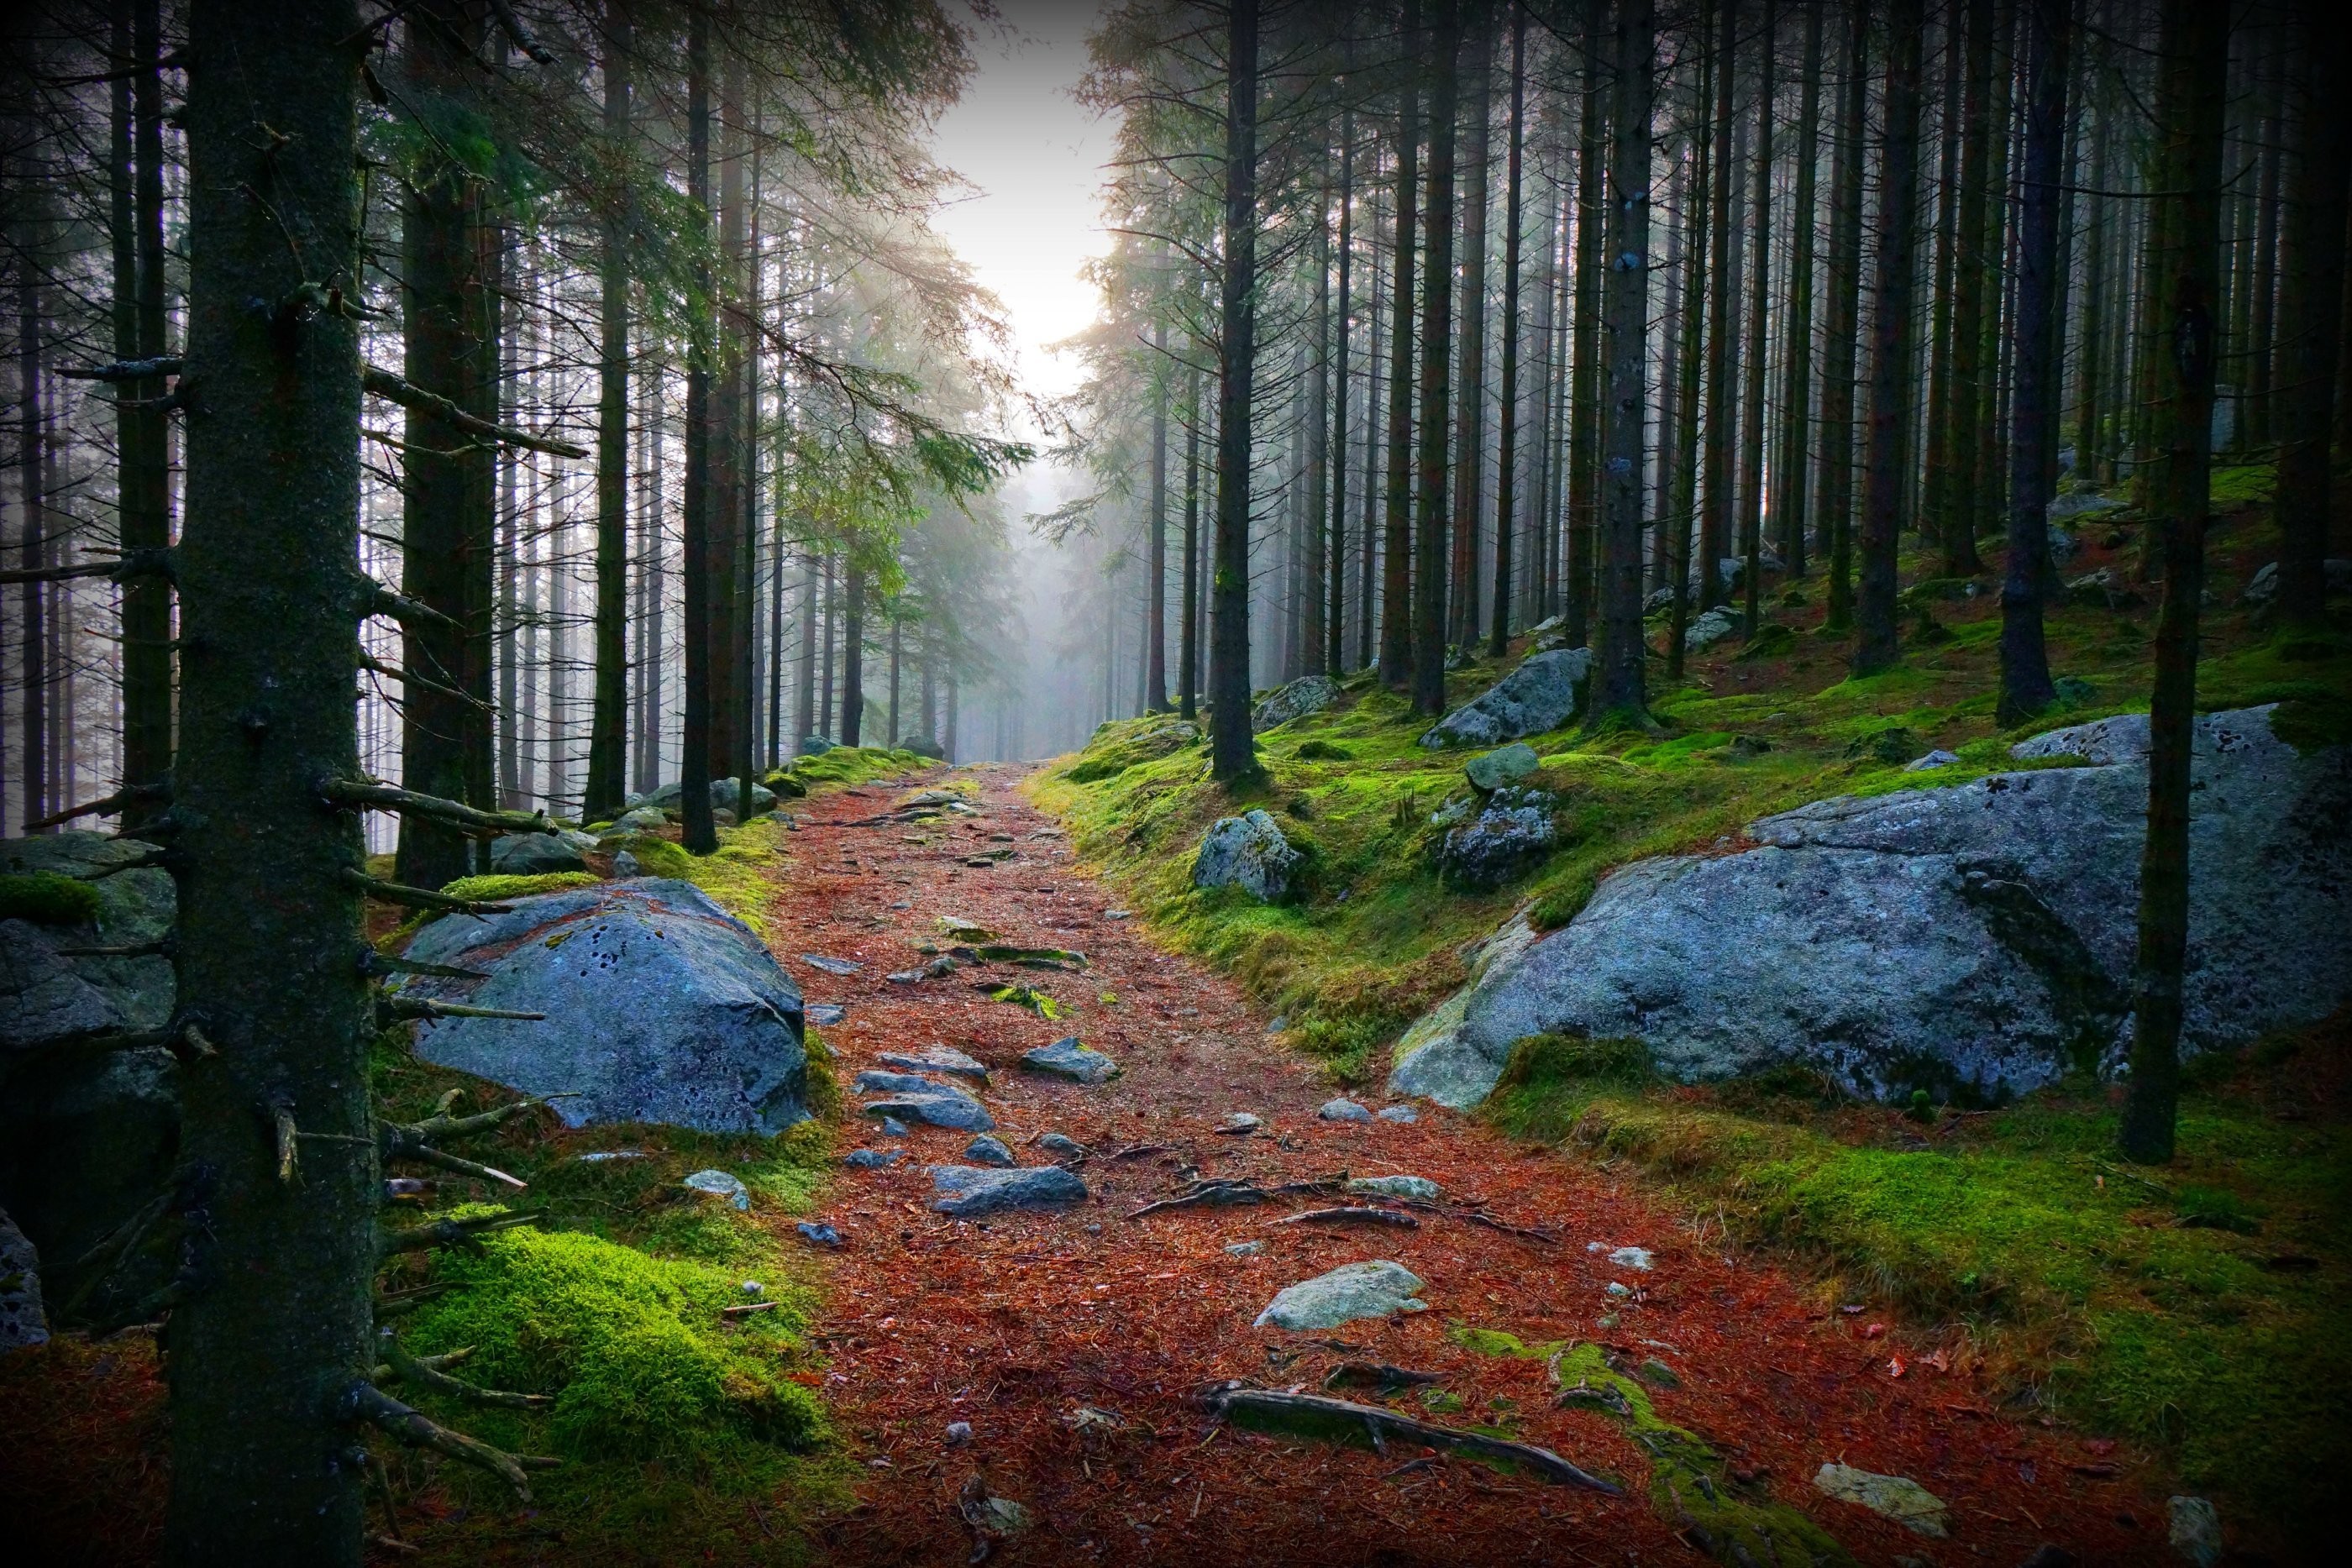 General 2800x1867 trees rocks outdoors plants nature path forest